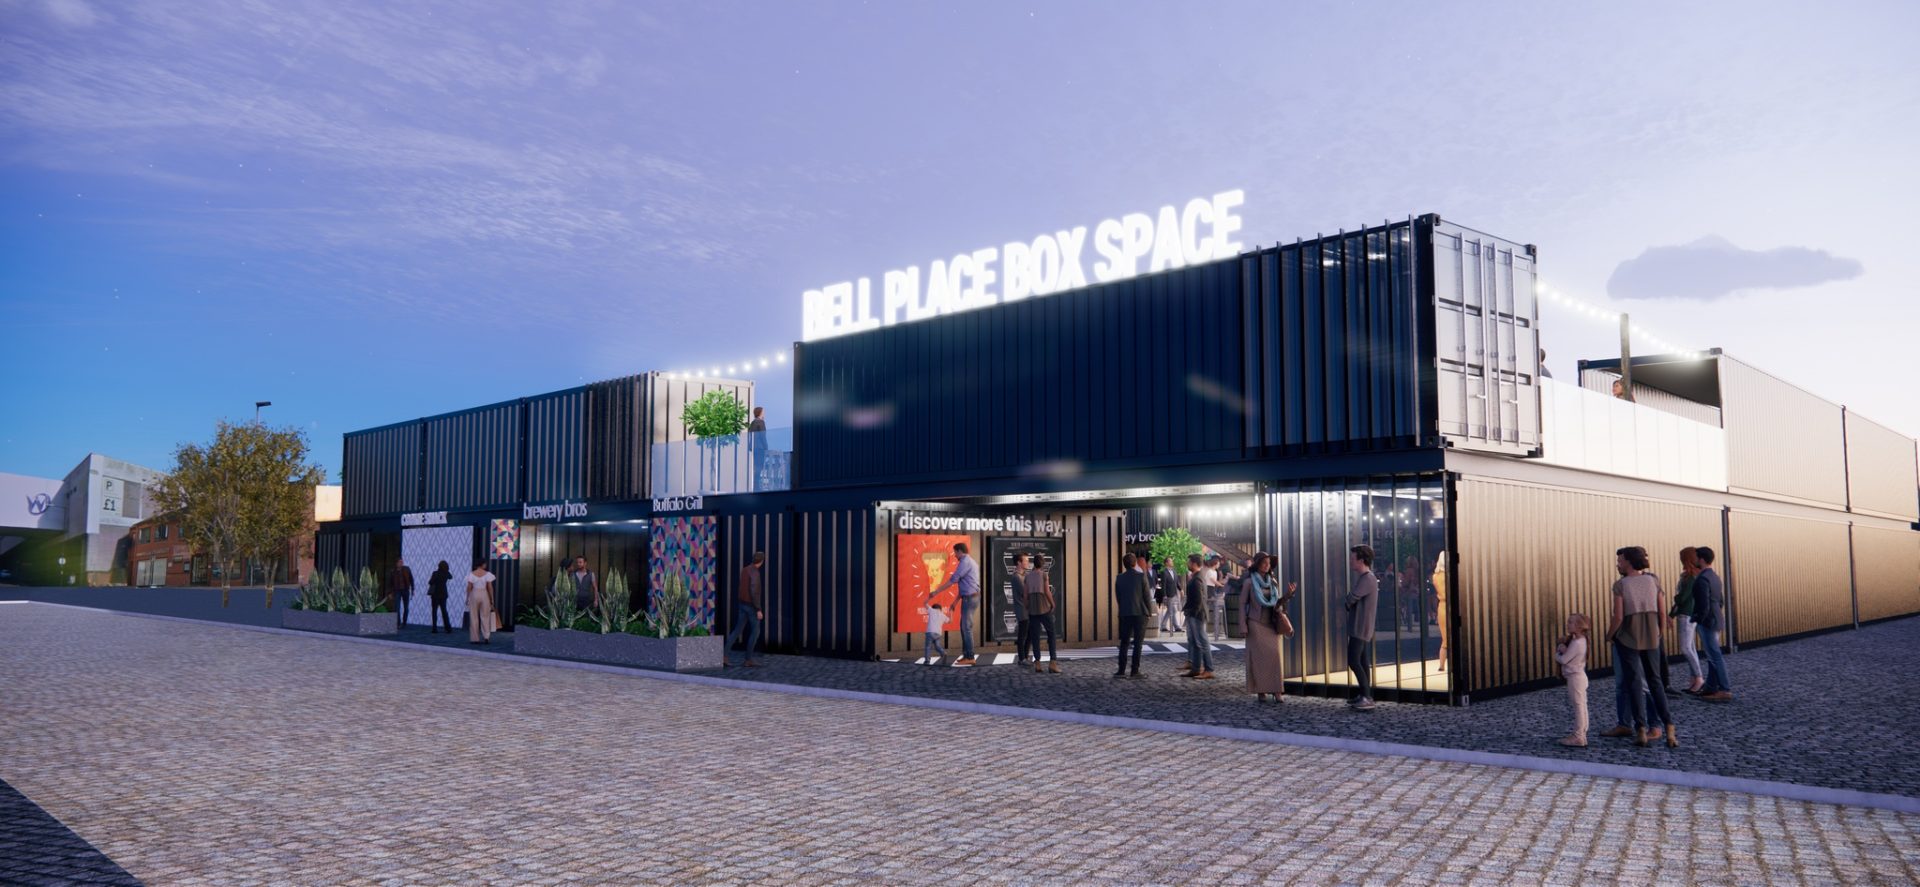 Demolition set to pave way for new £6million entertainment and events space in city centre